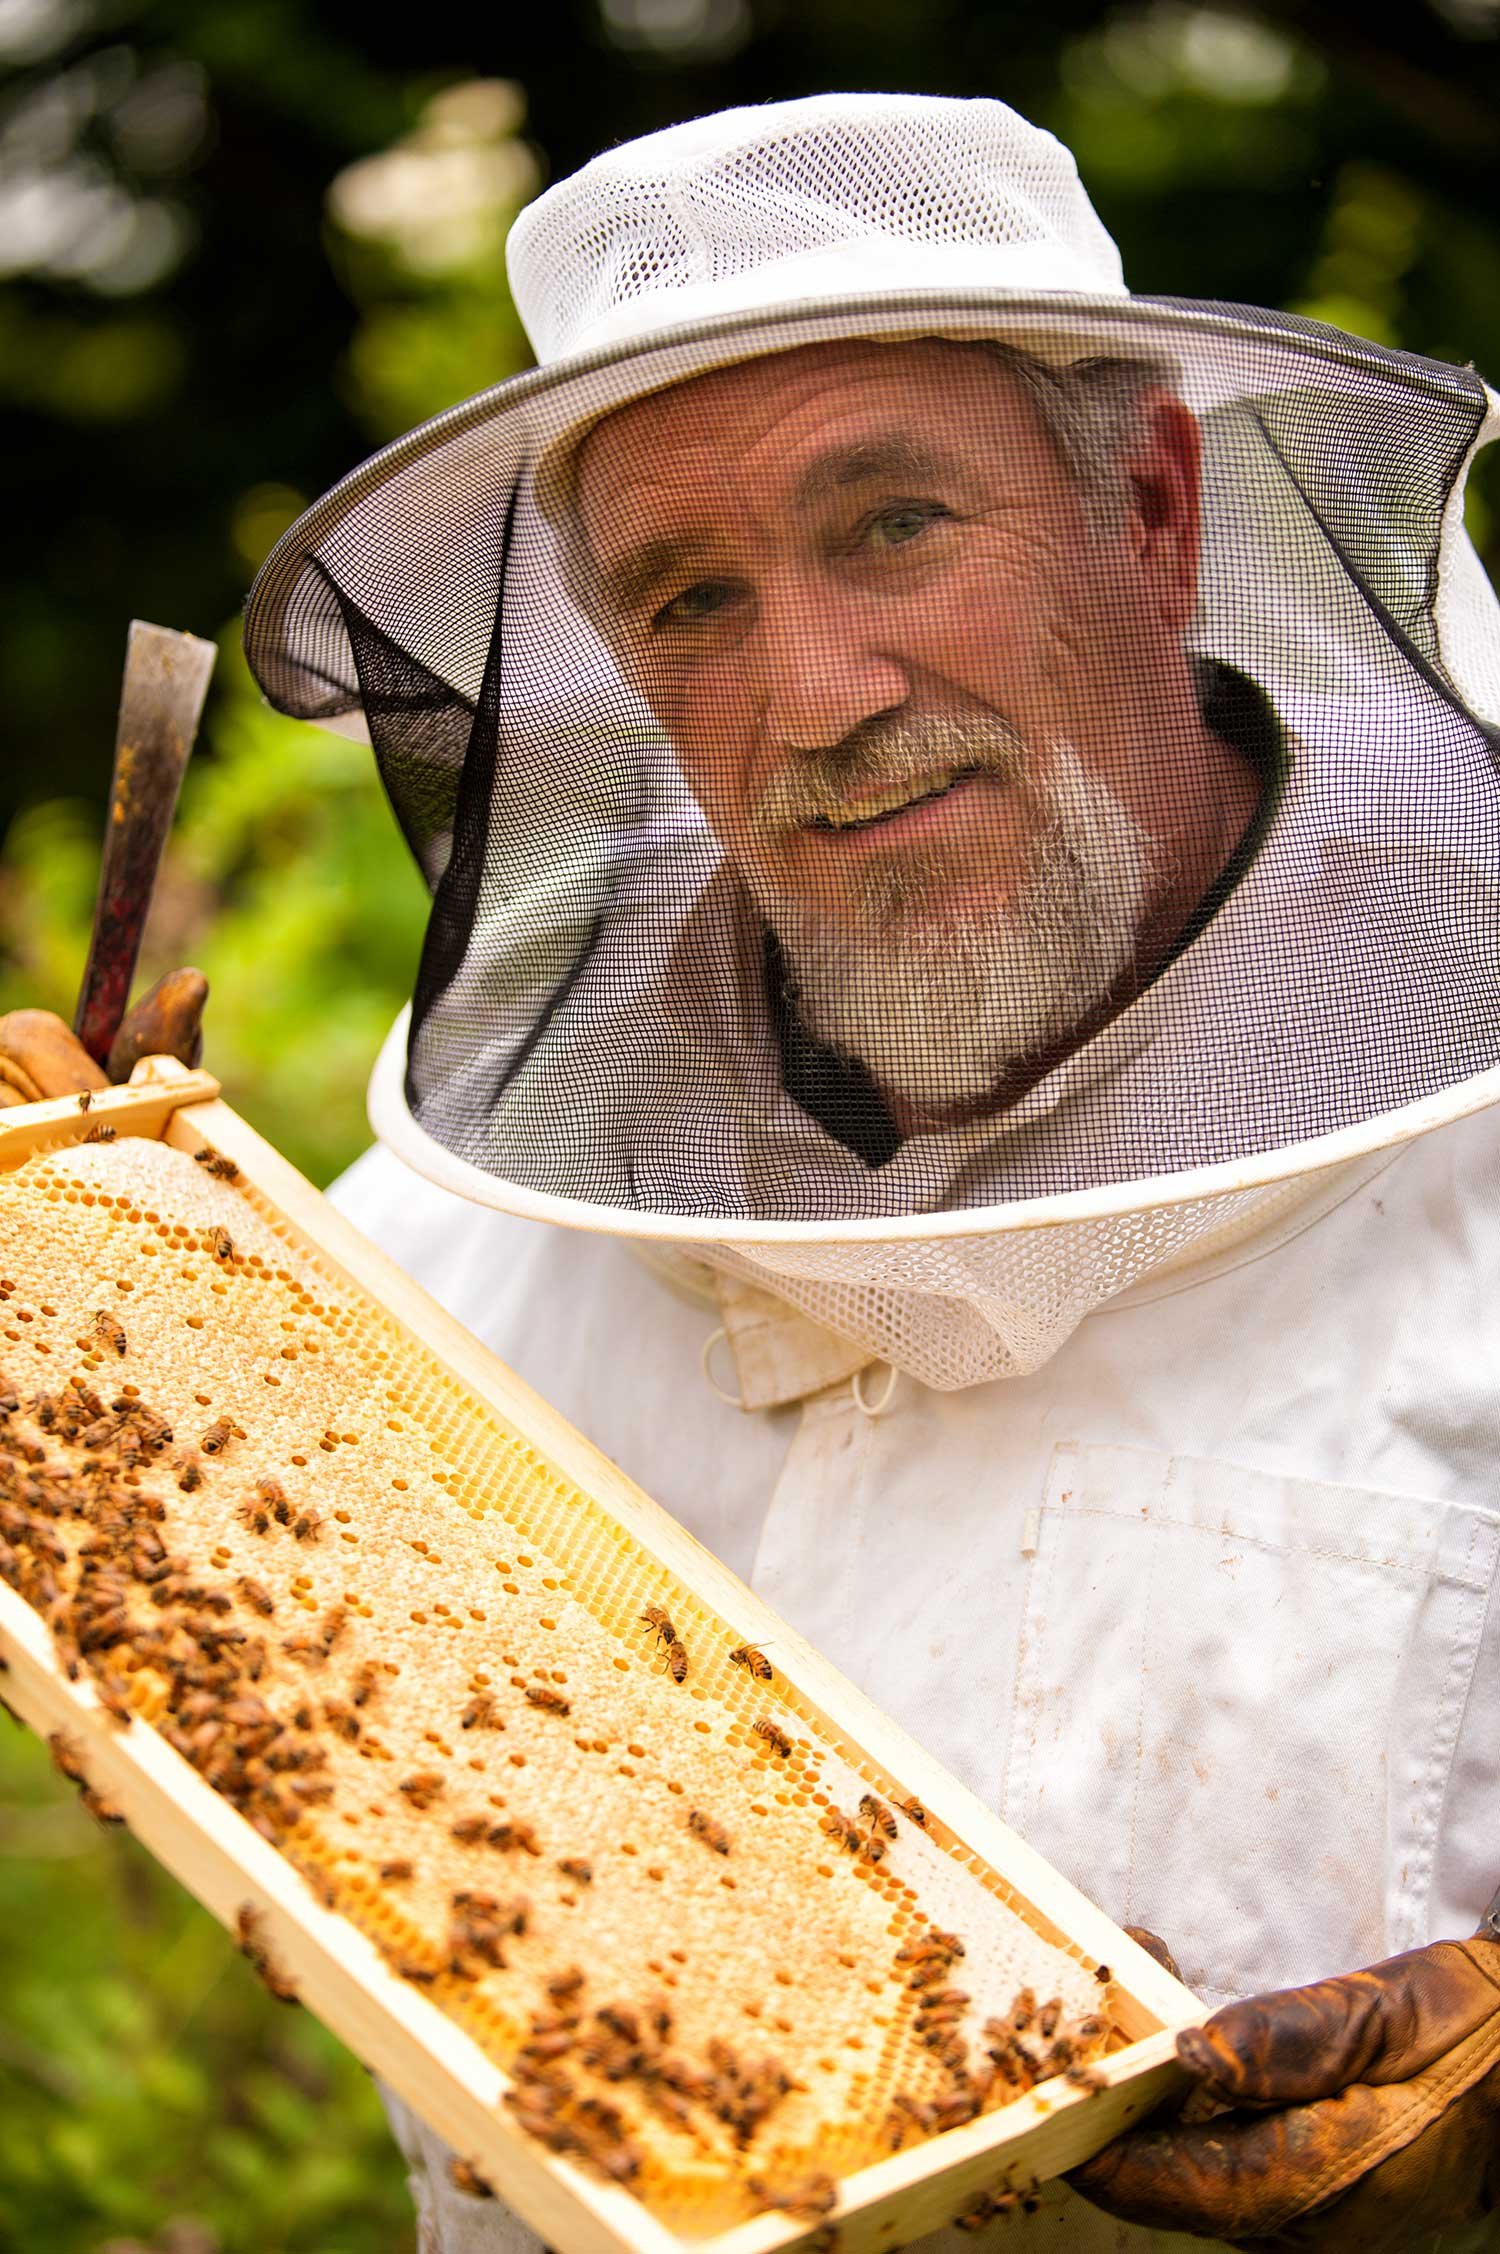 Veterans protect national food security by becoming beekeepers